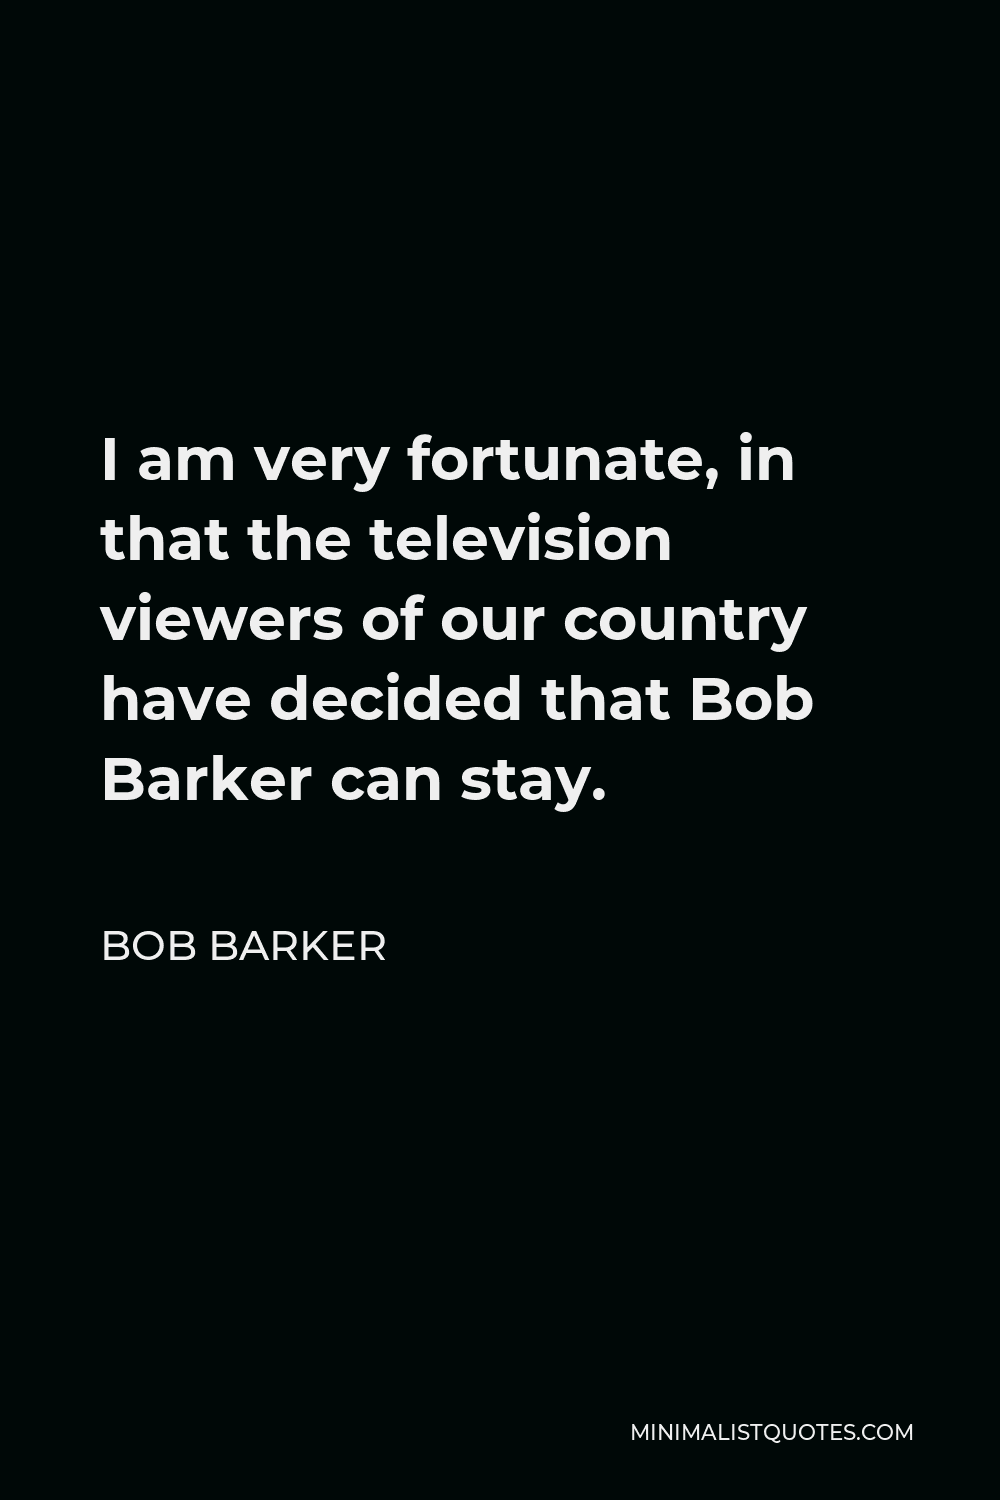 Bob Barker Quote - I am very fortunate, in that the television viewers of our country have decided that Bob Barker can stay.